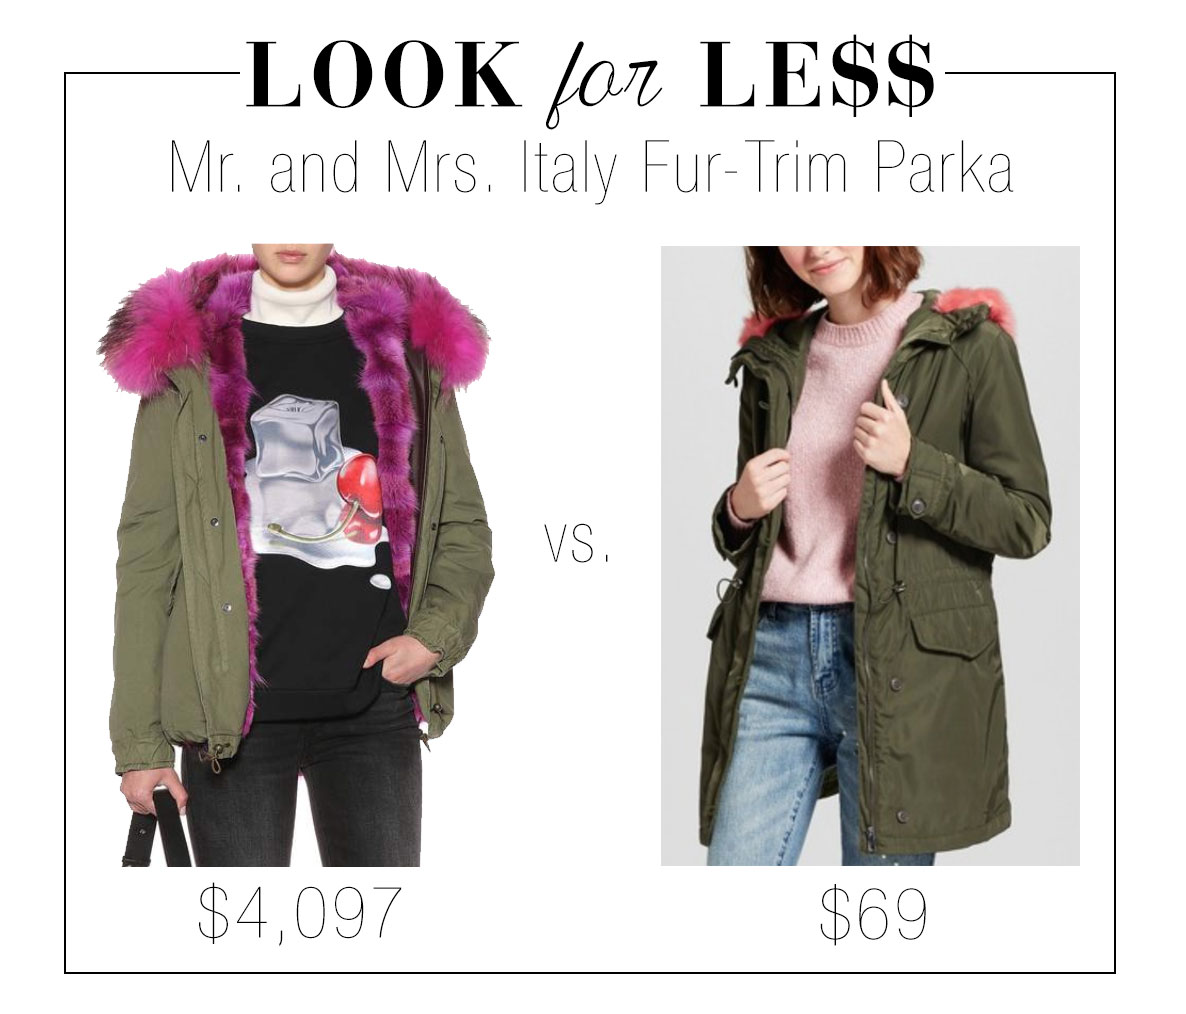 Mr. and Mrs. Italy pink fur trim parka look for less